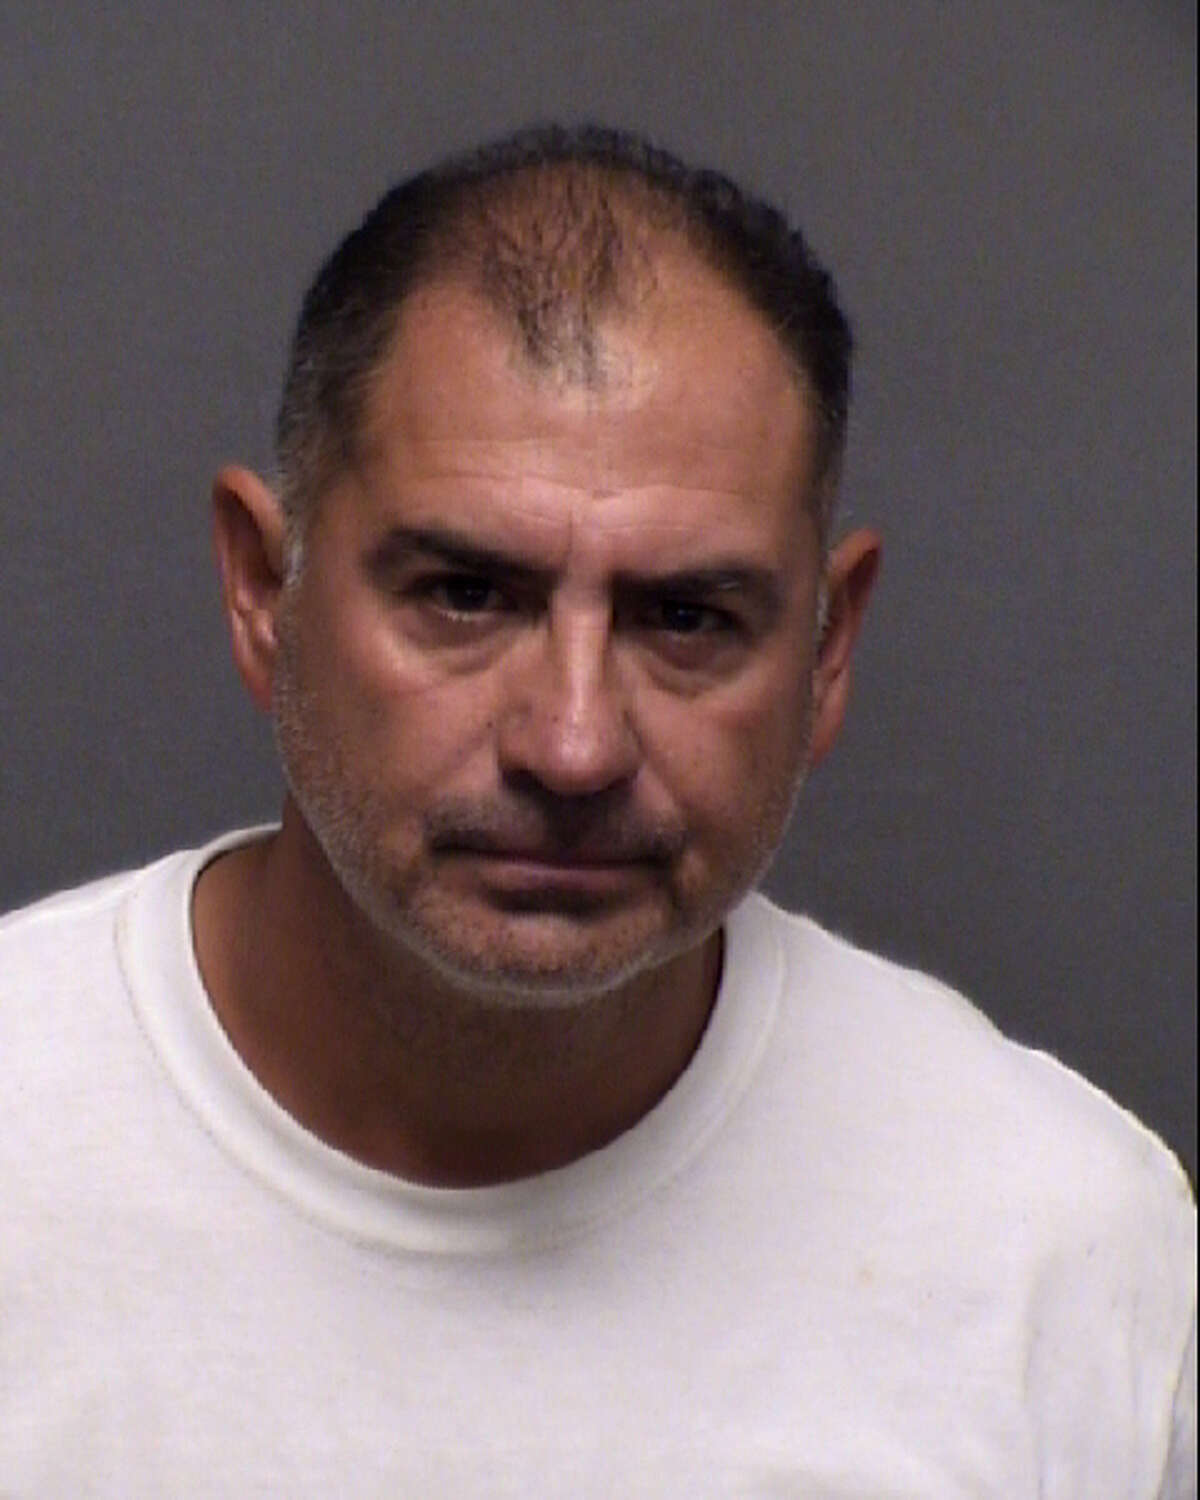 John Draeger was charged with driving while intoxicated, third or more, on July, 8, 2019.